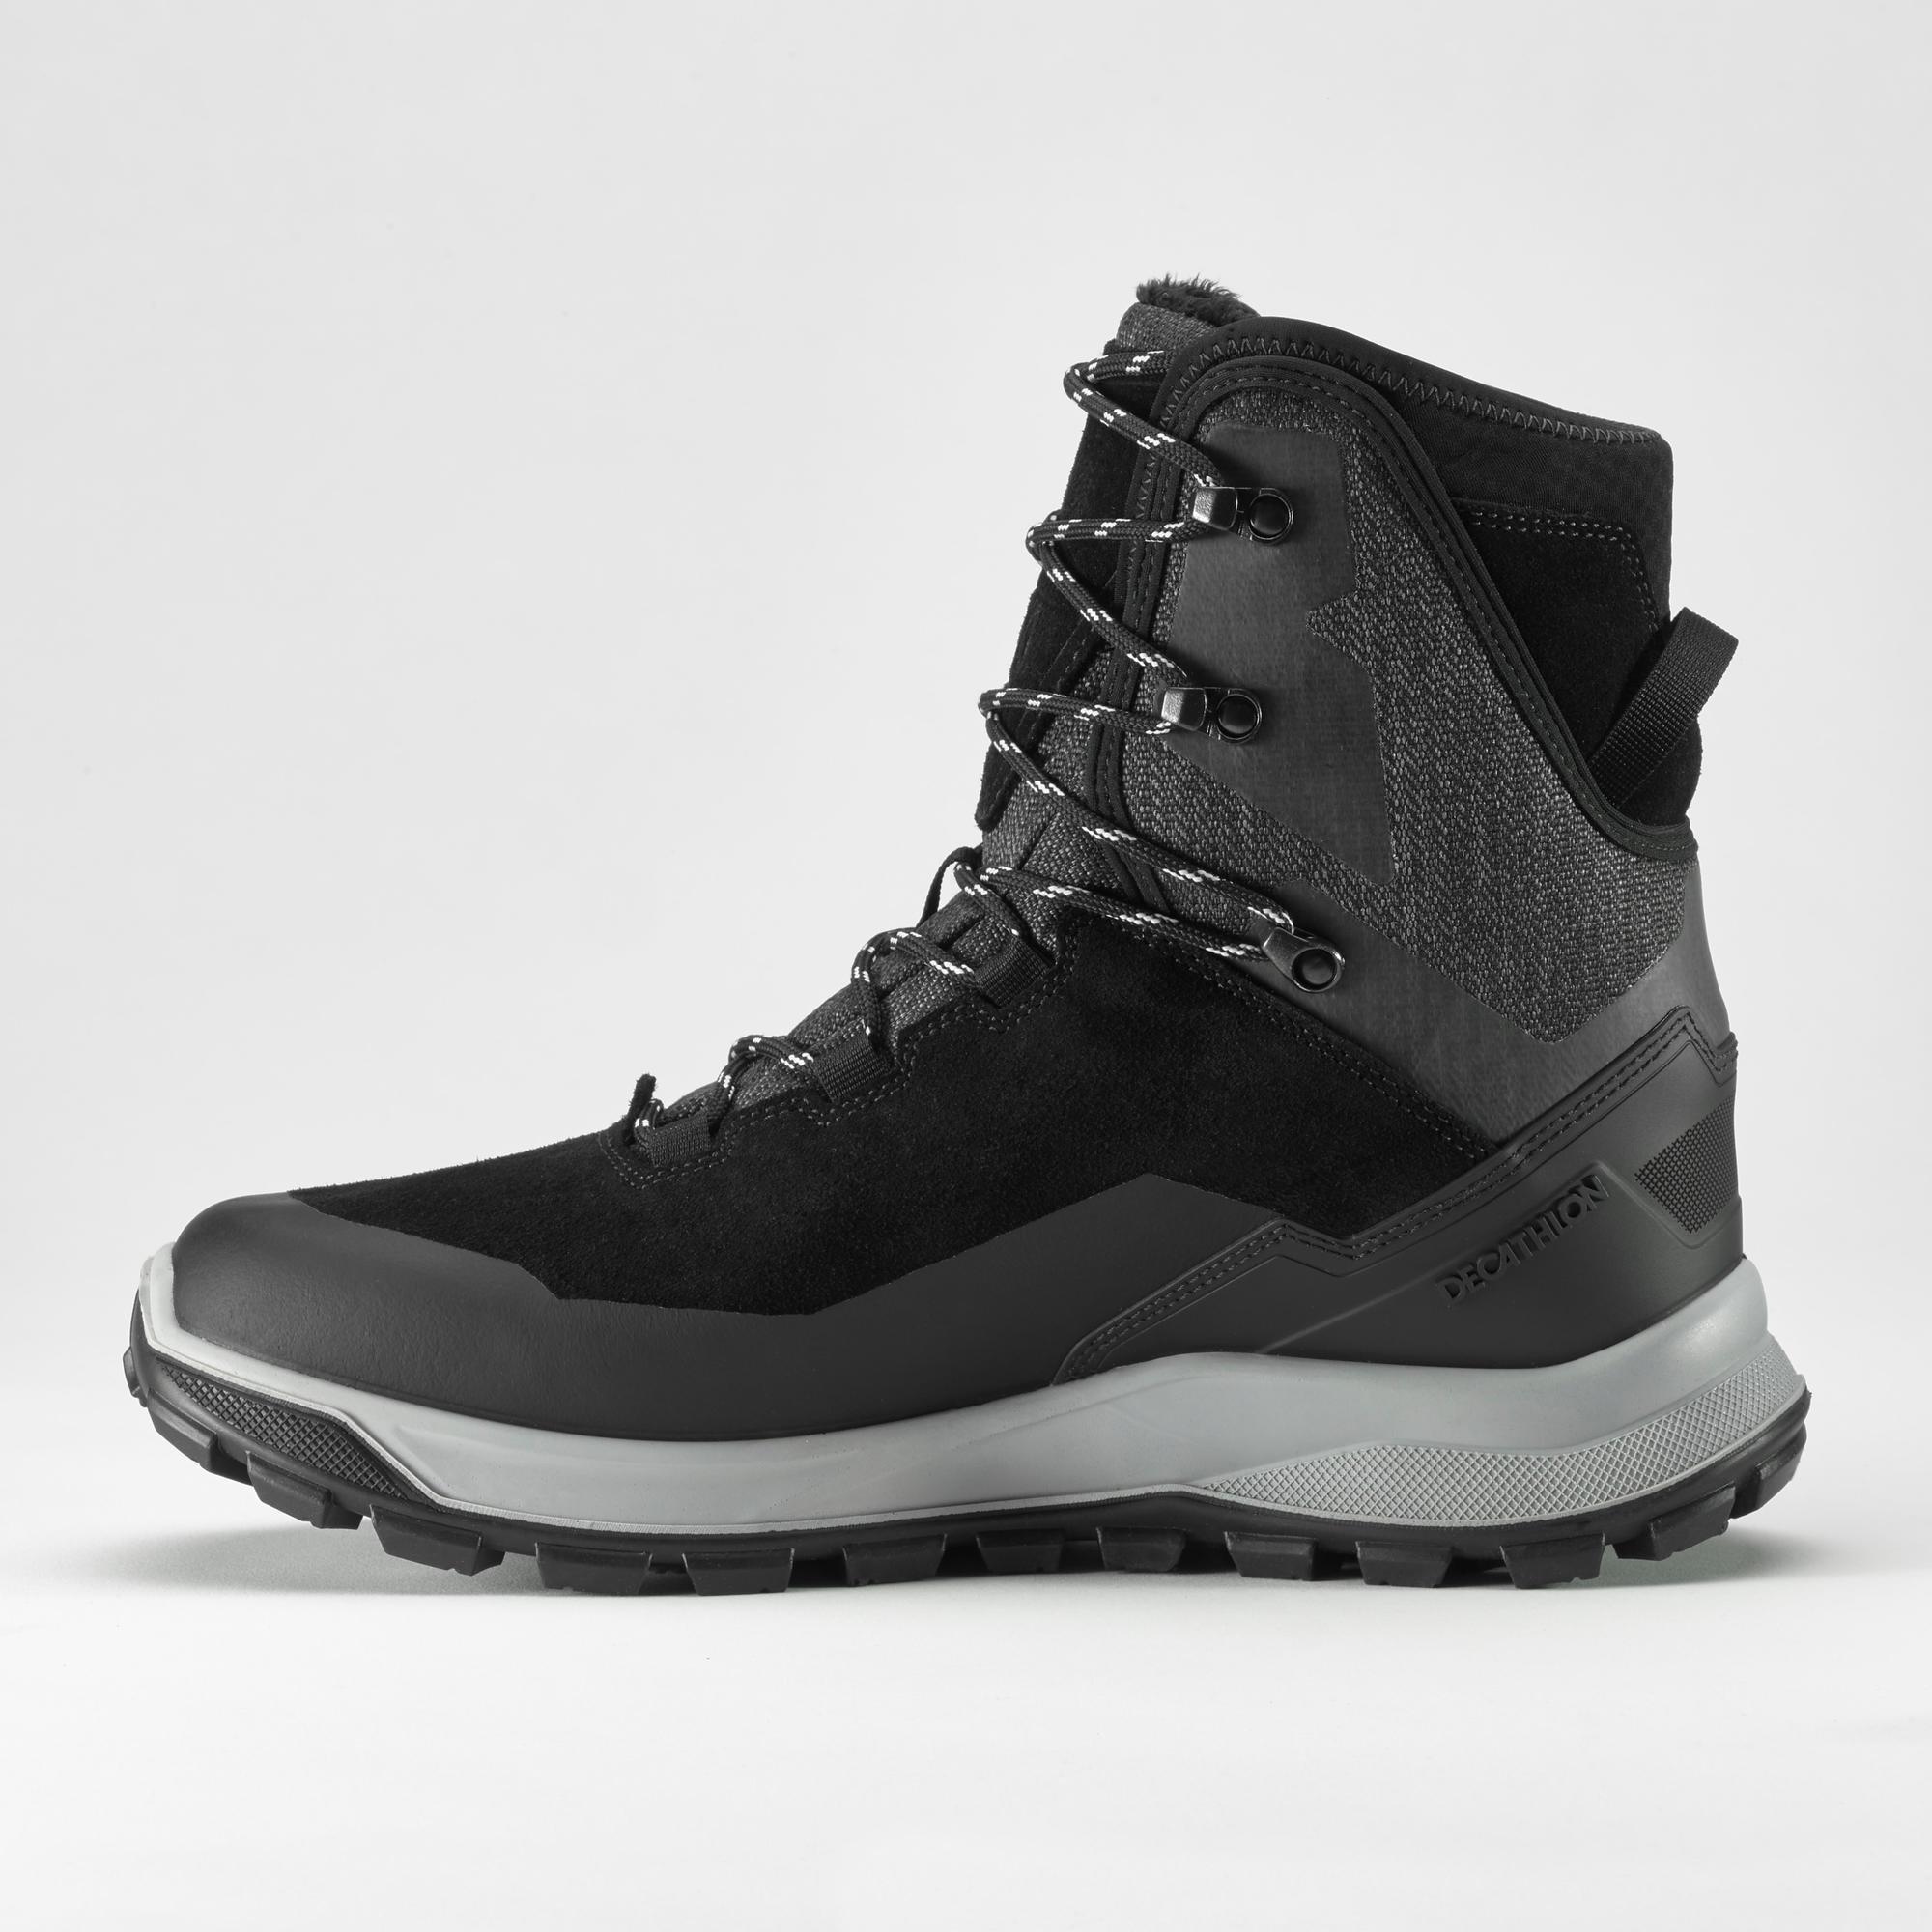 Boots, Decathlon Warm And Waterproof Leather Hiking Boots - Sh900 High